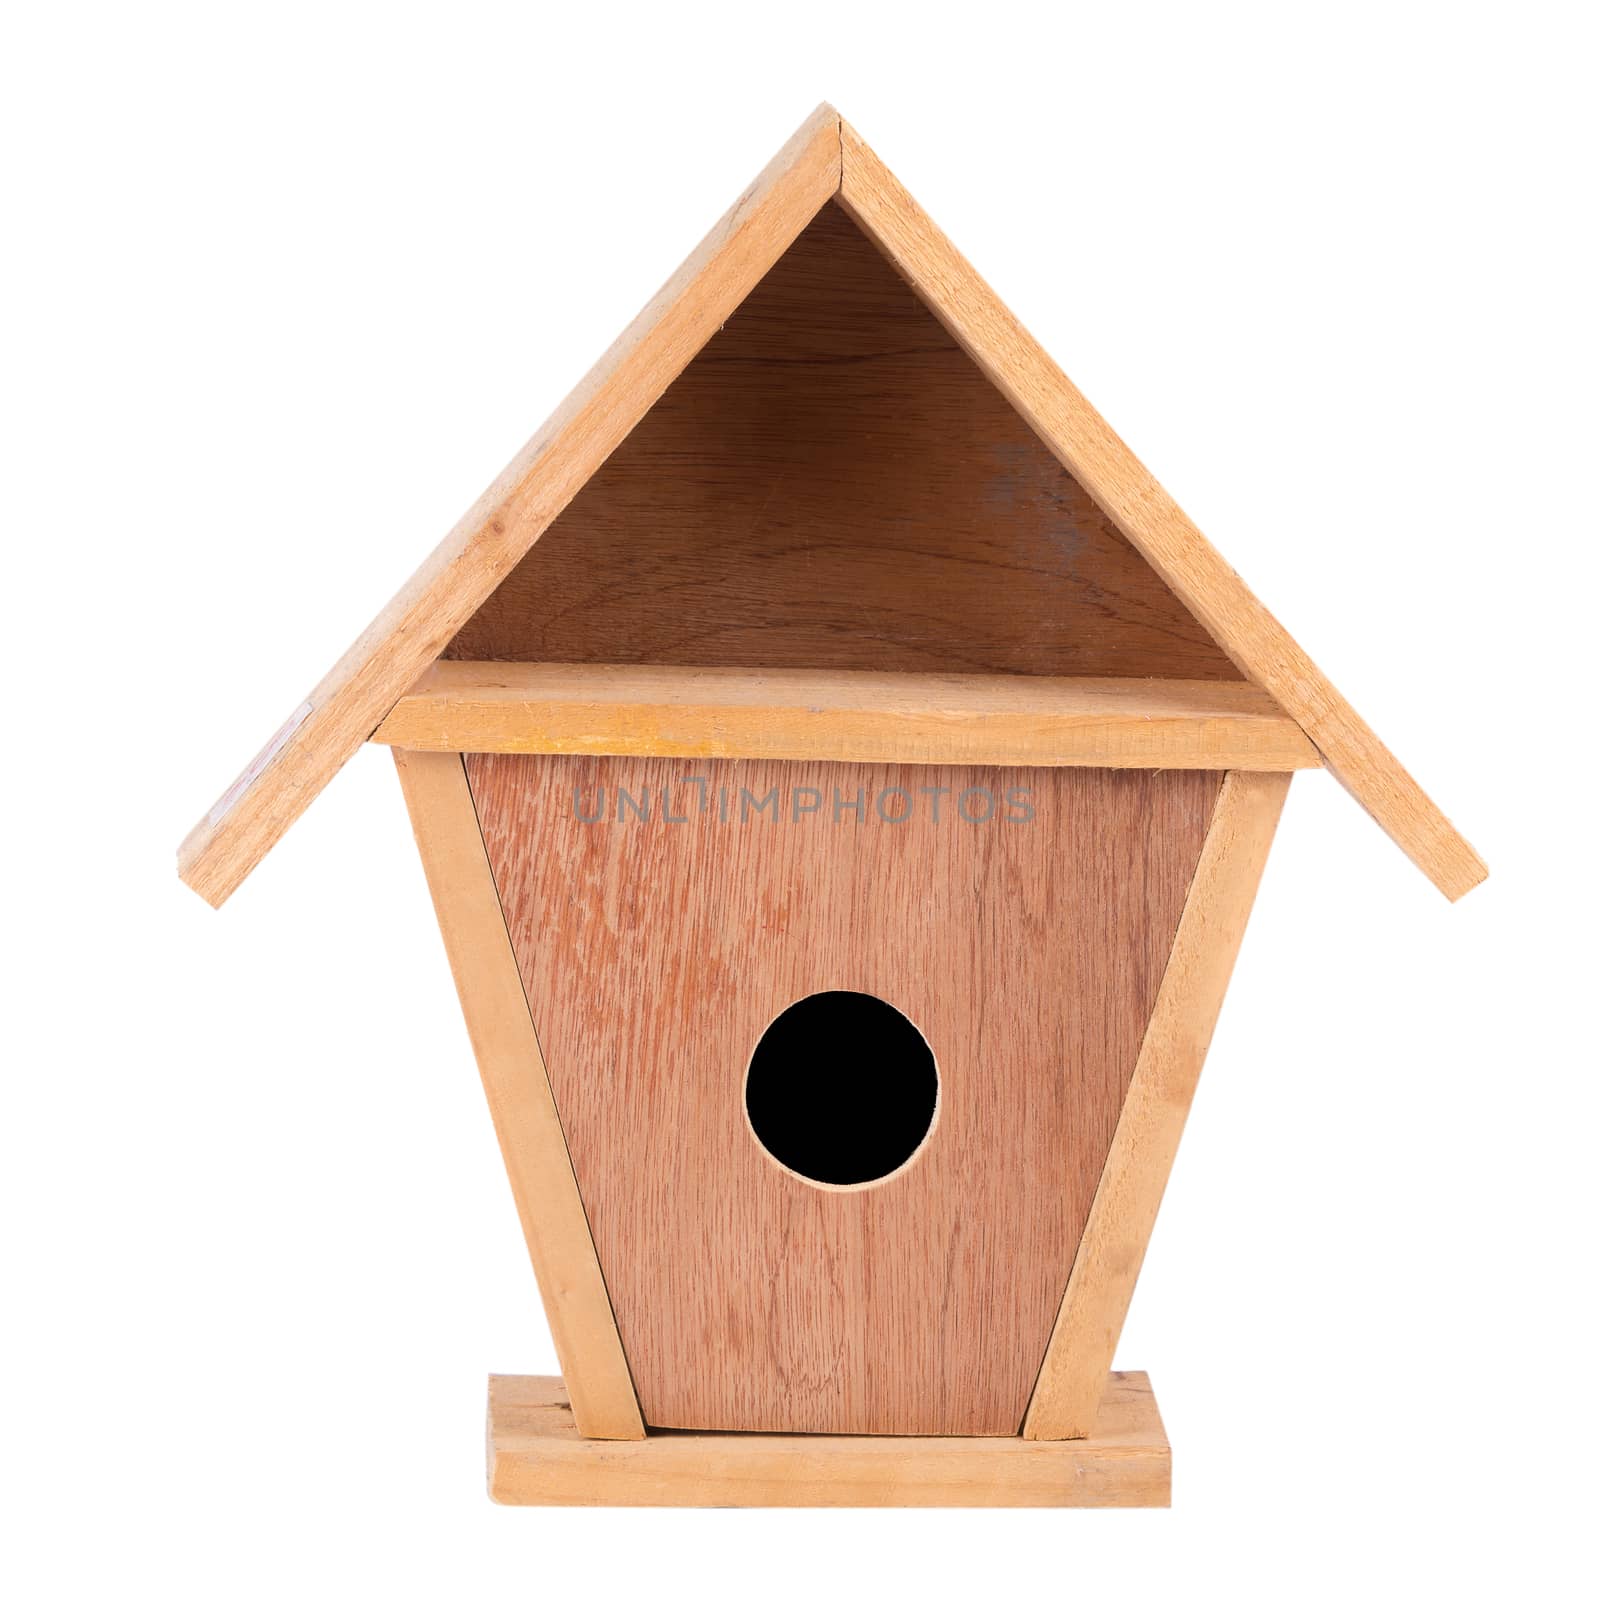 Wooden Bird House Isolated on White background by kaiskynet